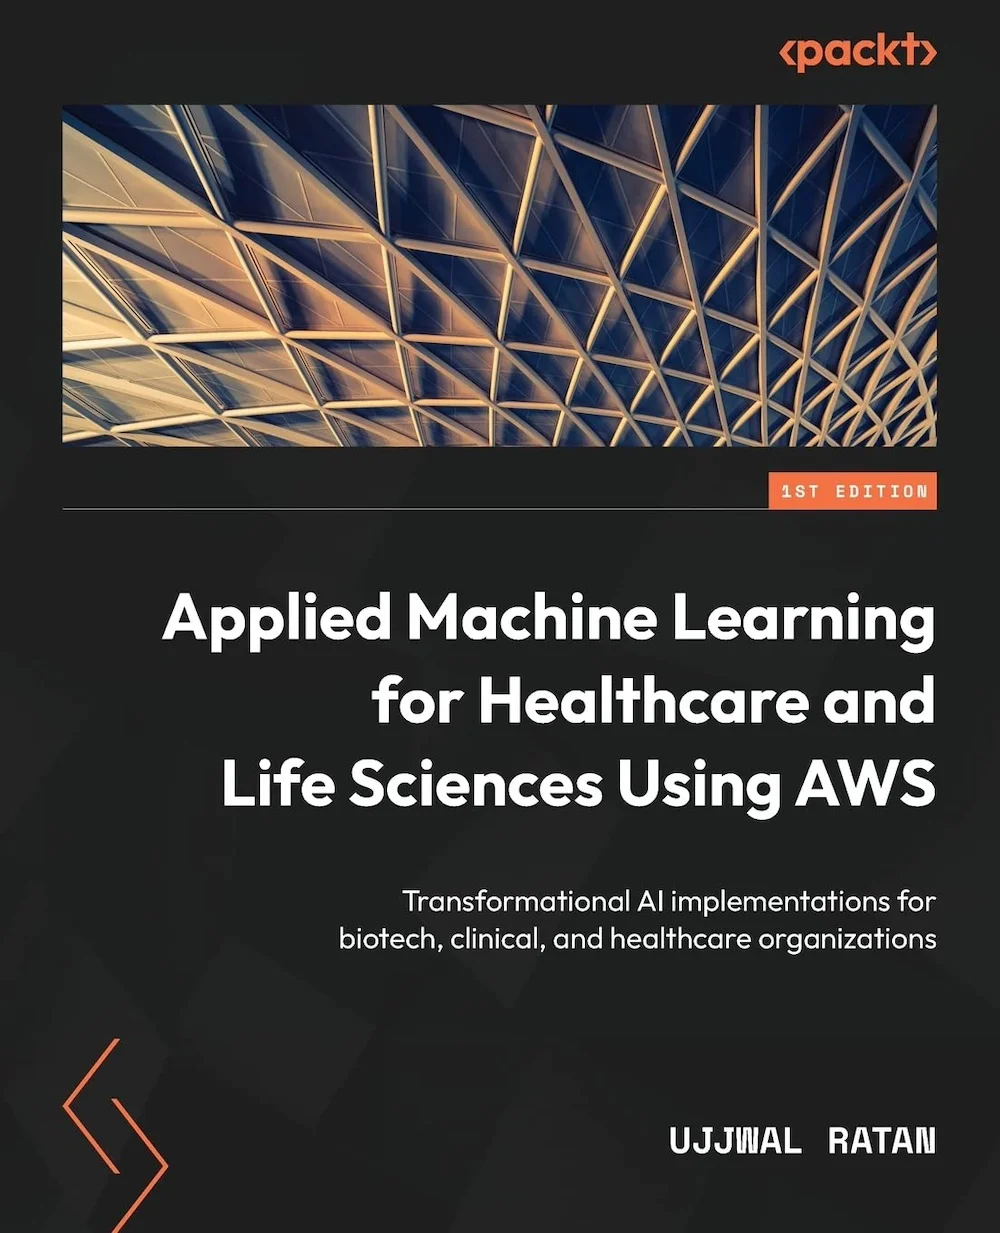 Applied Machine Learning for Healthcare and Life Sciences Using AWS book cover